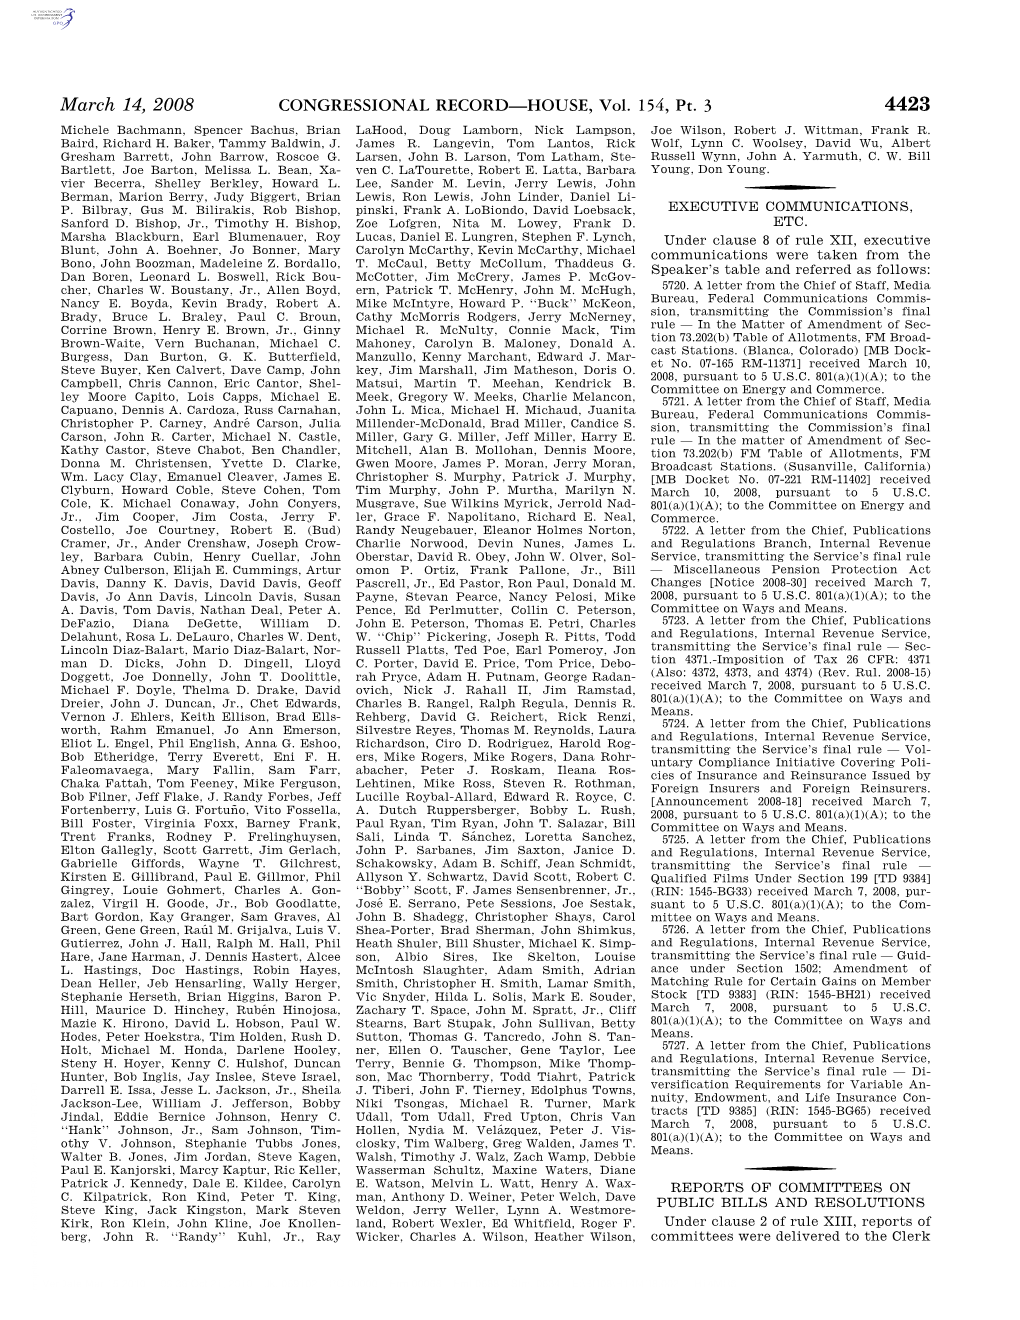 CONGRESSIONAL RECORD—HOUSE, Vol. 154, Pt. 3 March 14, 2008 for Printing and Reference to the Proper H.R